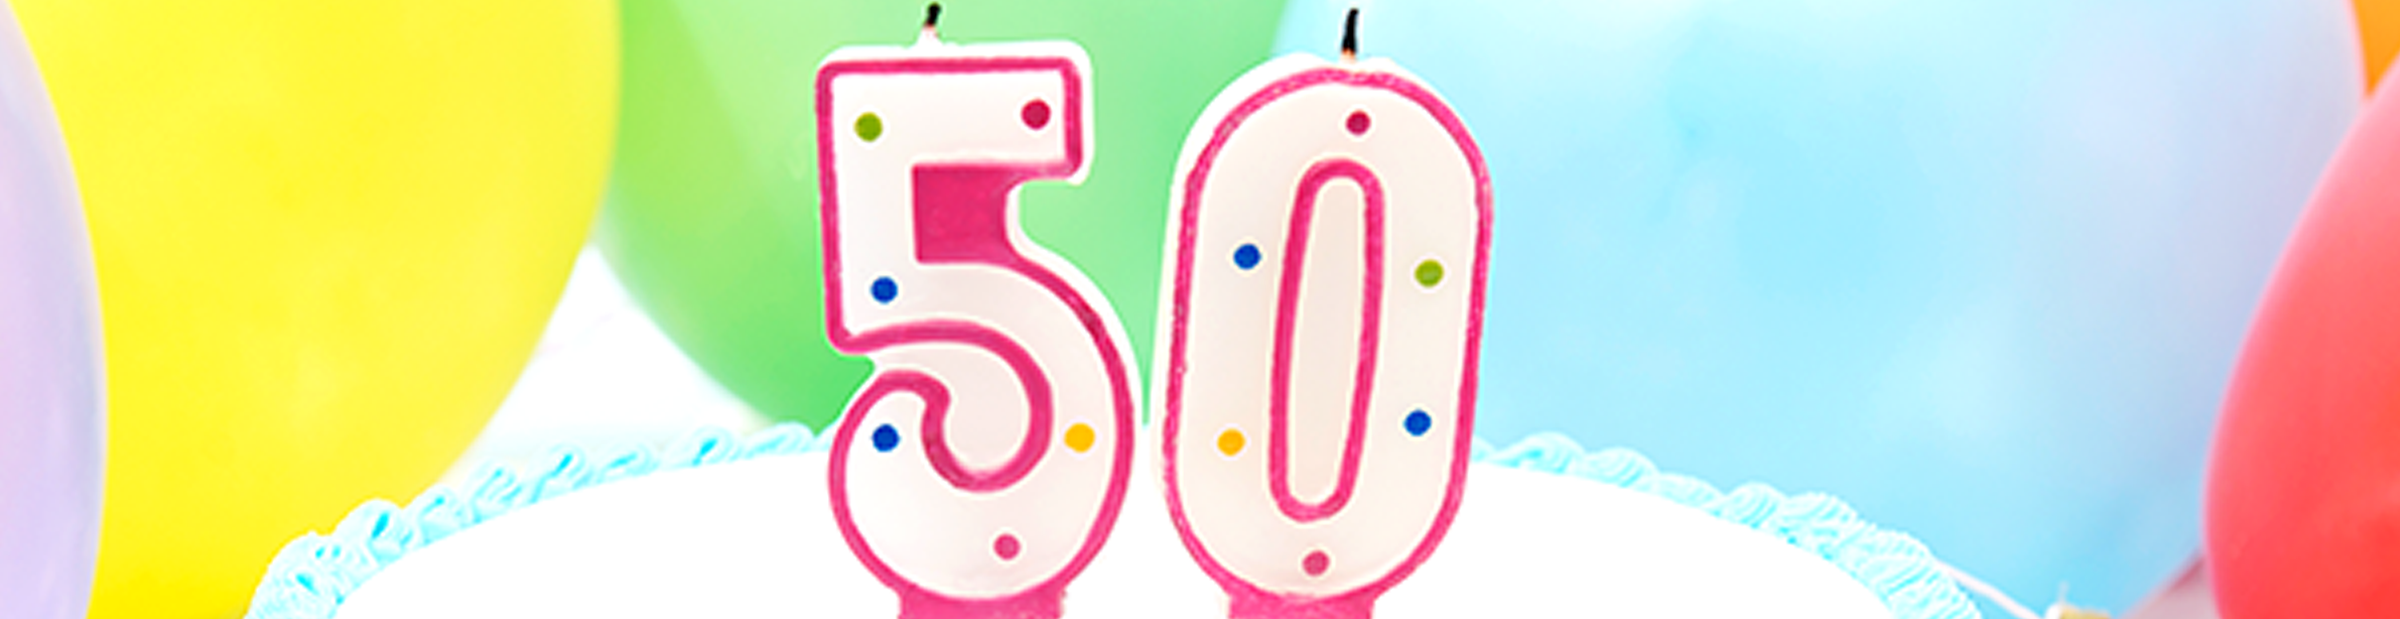 50th Birthday Messages - American Greetings